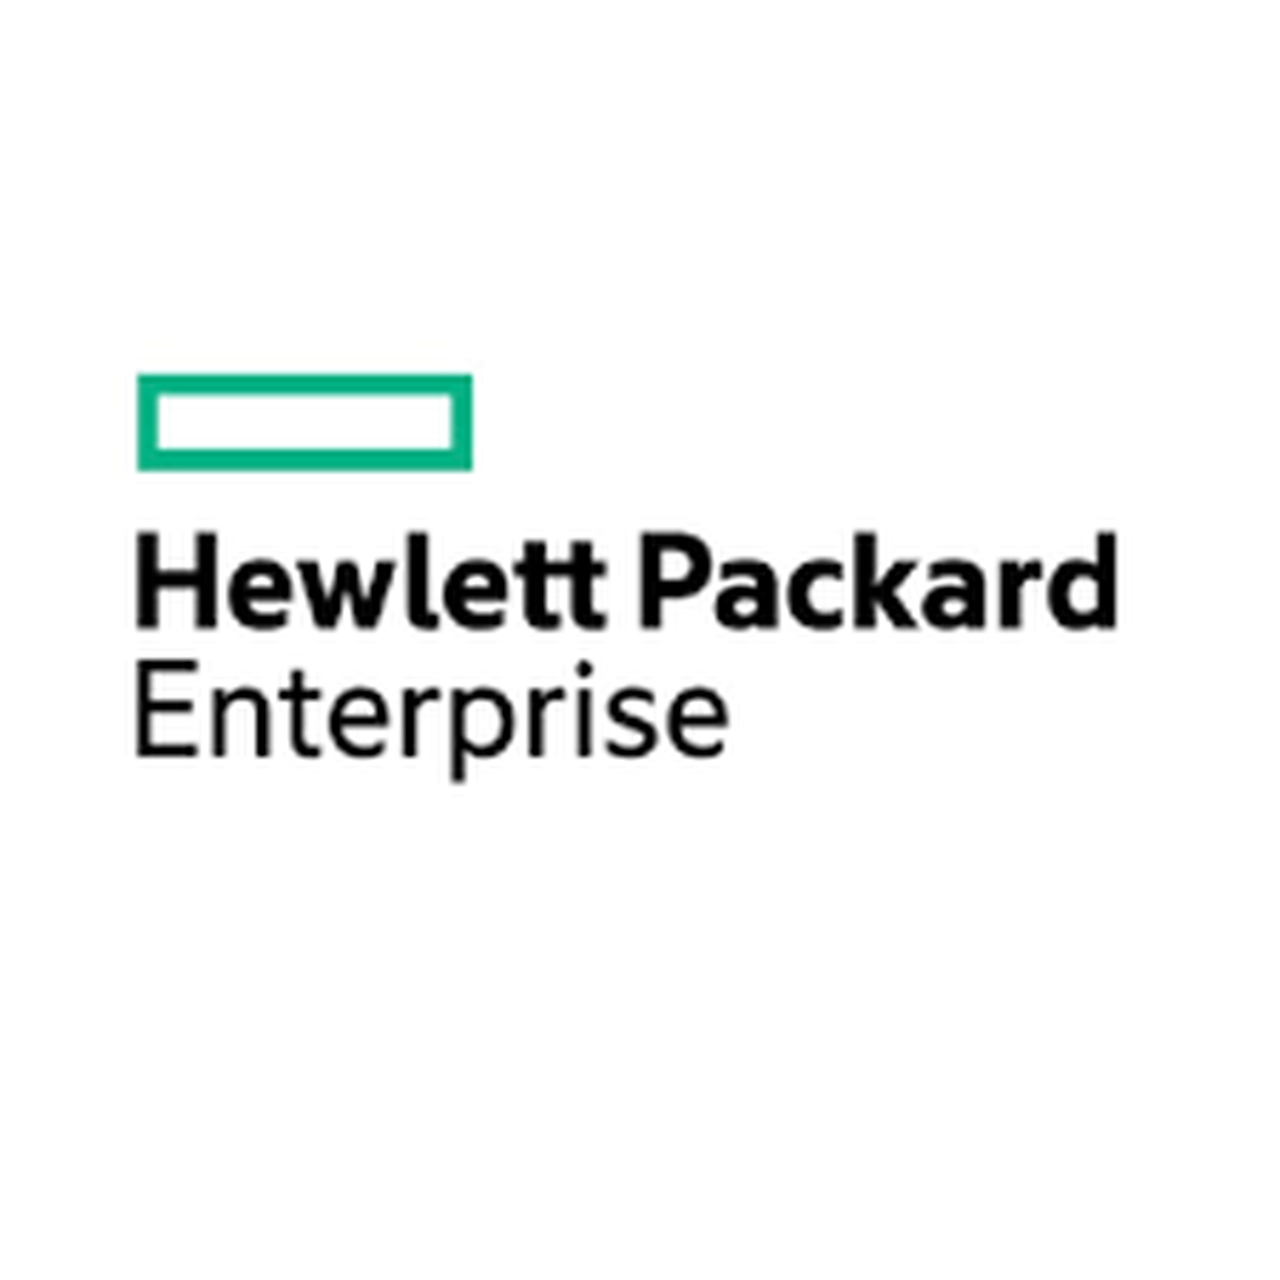 HPE SN6000B 16Gb 48/48 Pwr Pk+ Fiber Channel Switch South Africa - English localization